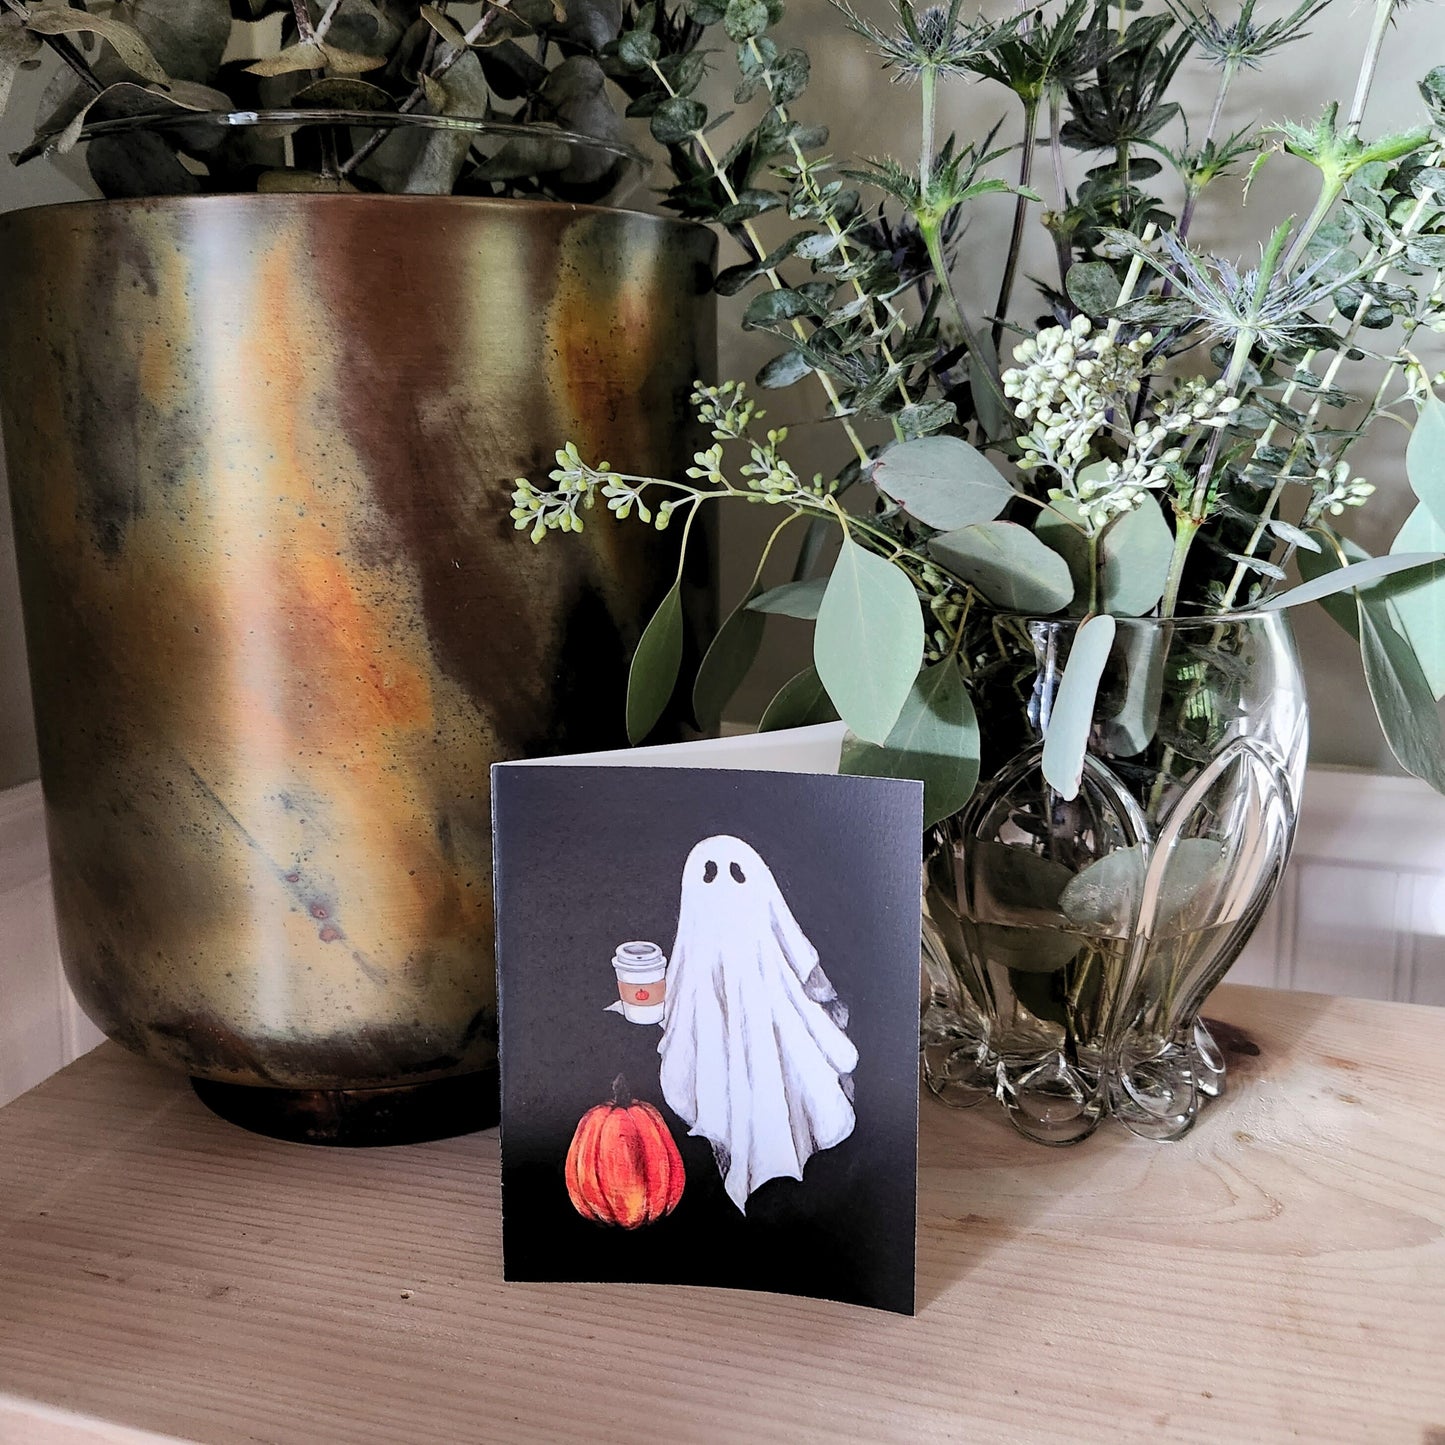 Halloween ghost greeting card, Spooky season card, Cute vintage ghost illustration, Gothic art card for her, Him, Friend, Partner, Mom, Dad